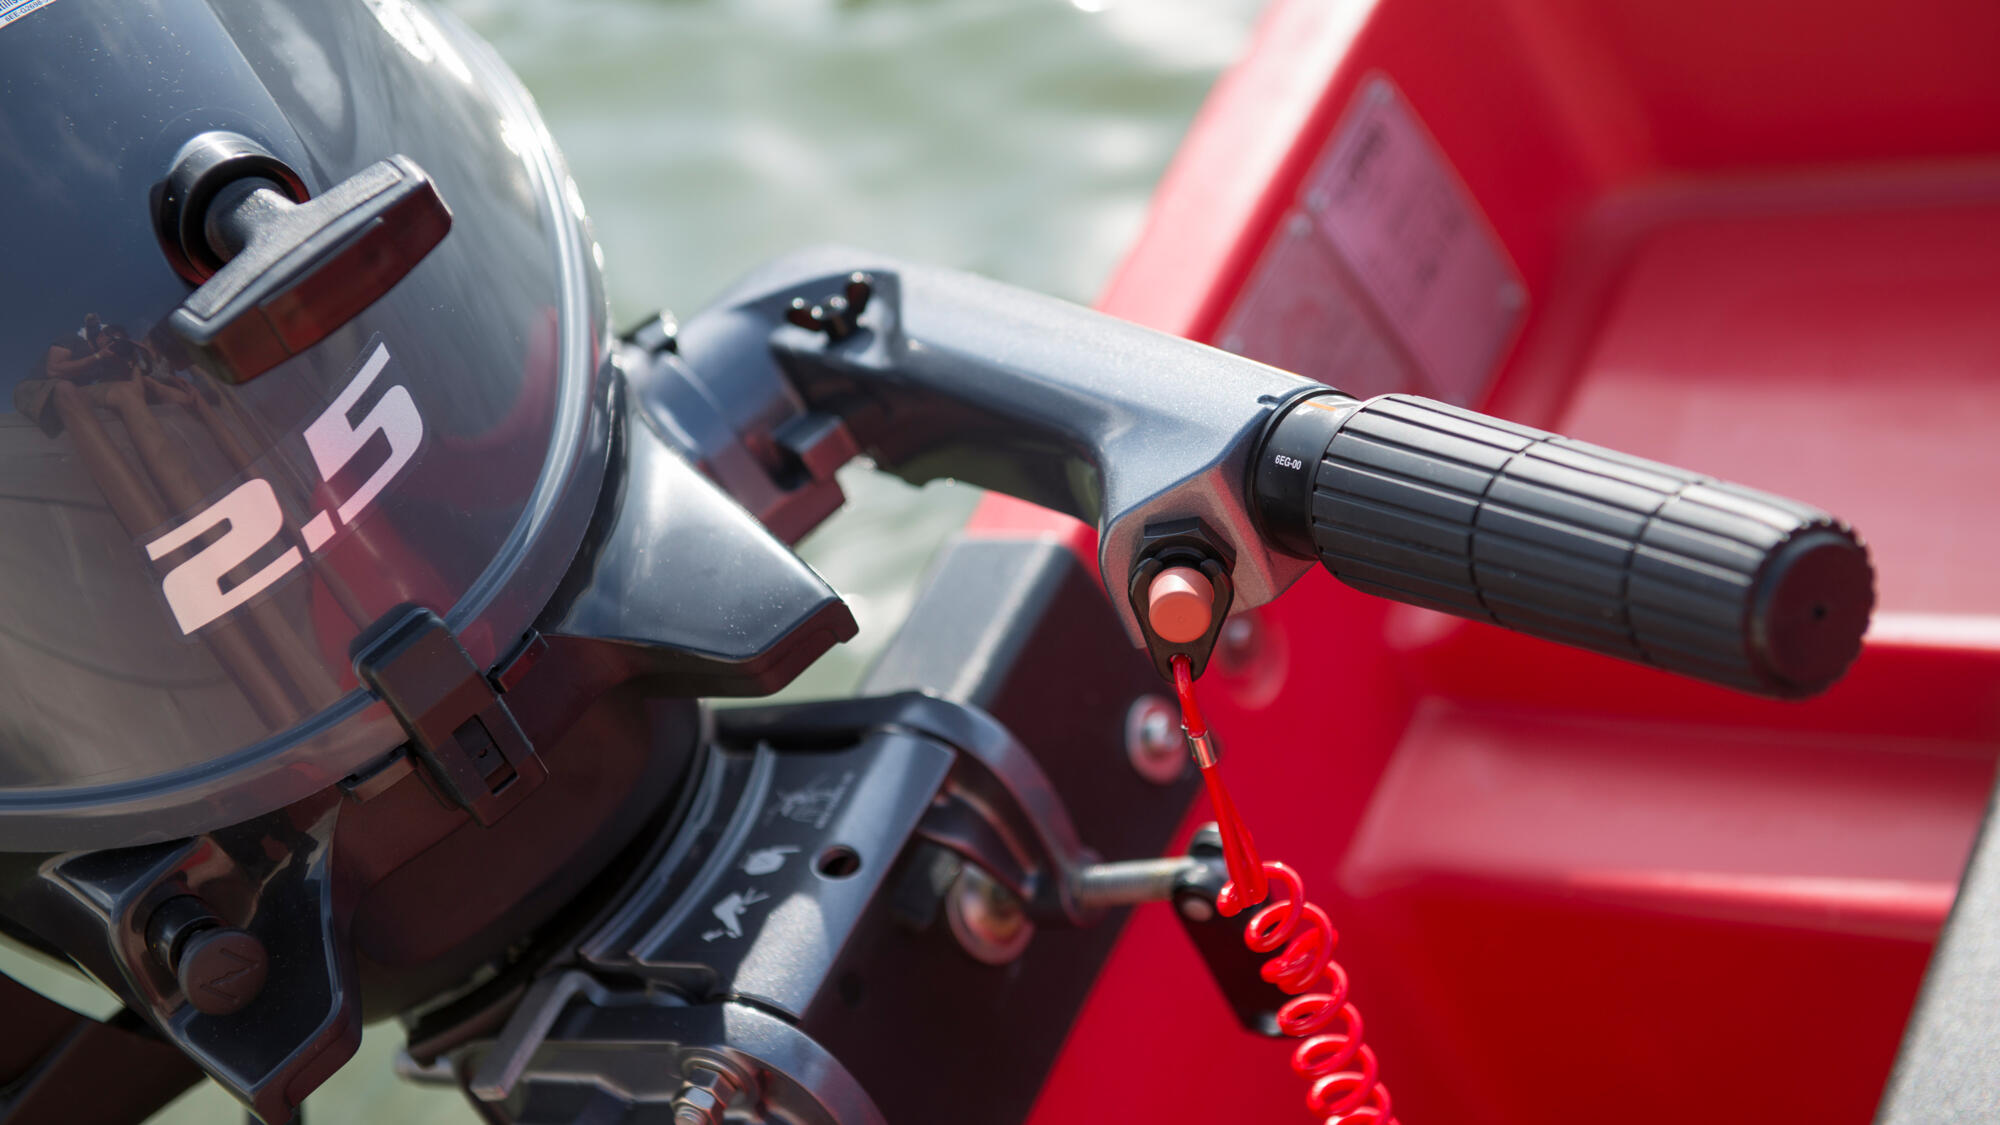 Strong tiller handle with comfortable twist-grip throttle